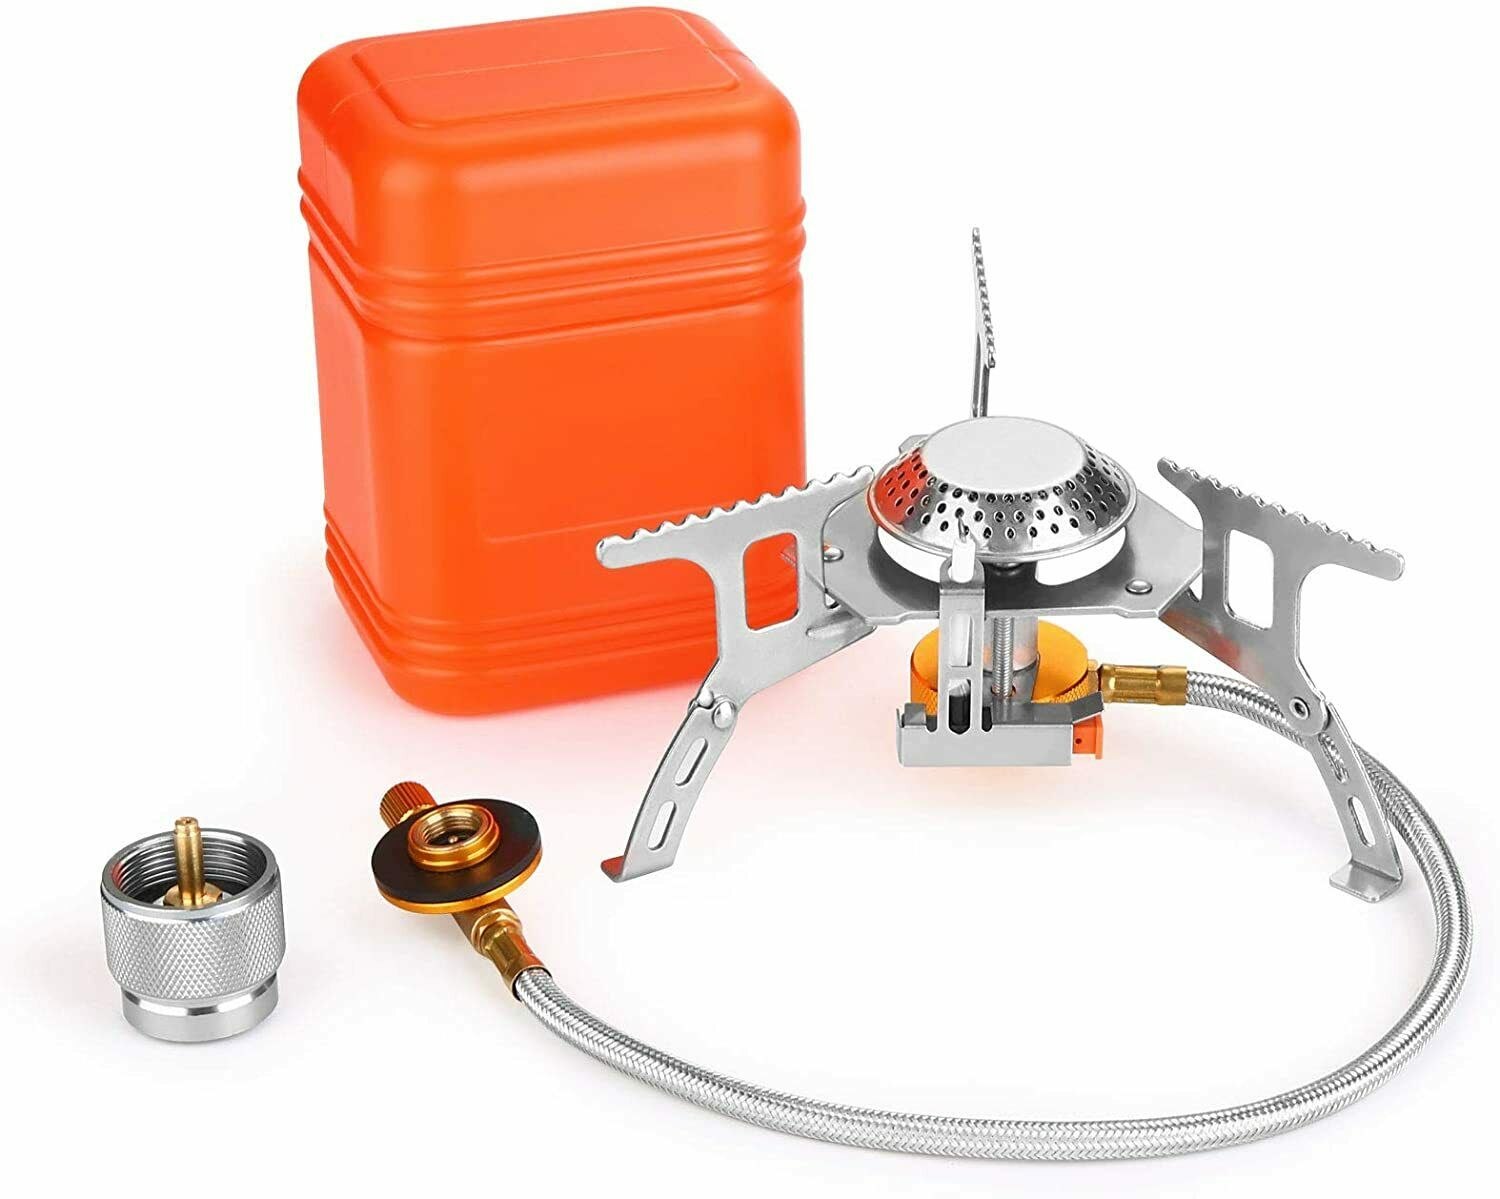 3700W Portable Backpacking Camping Gas Stove with Piezo Ignition, Burner, Case